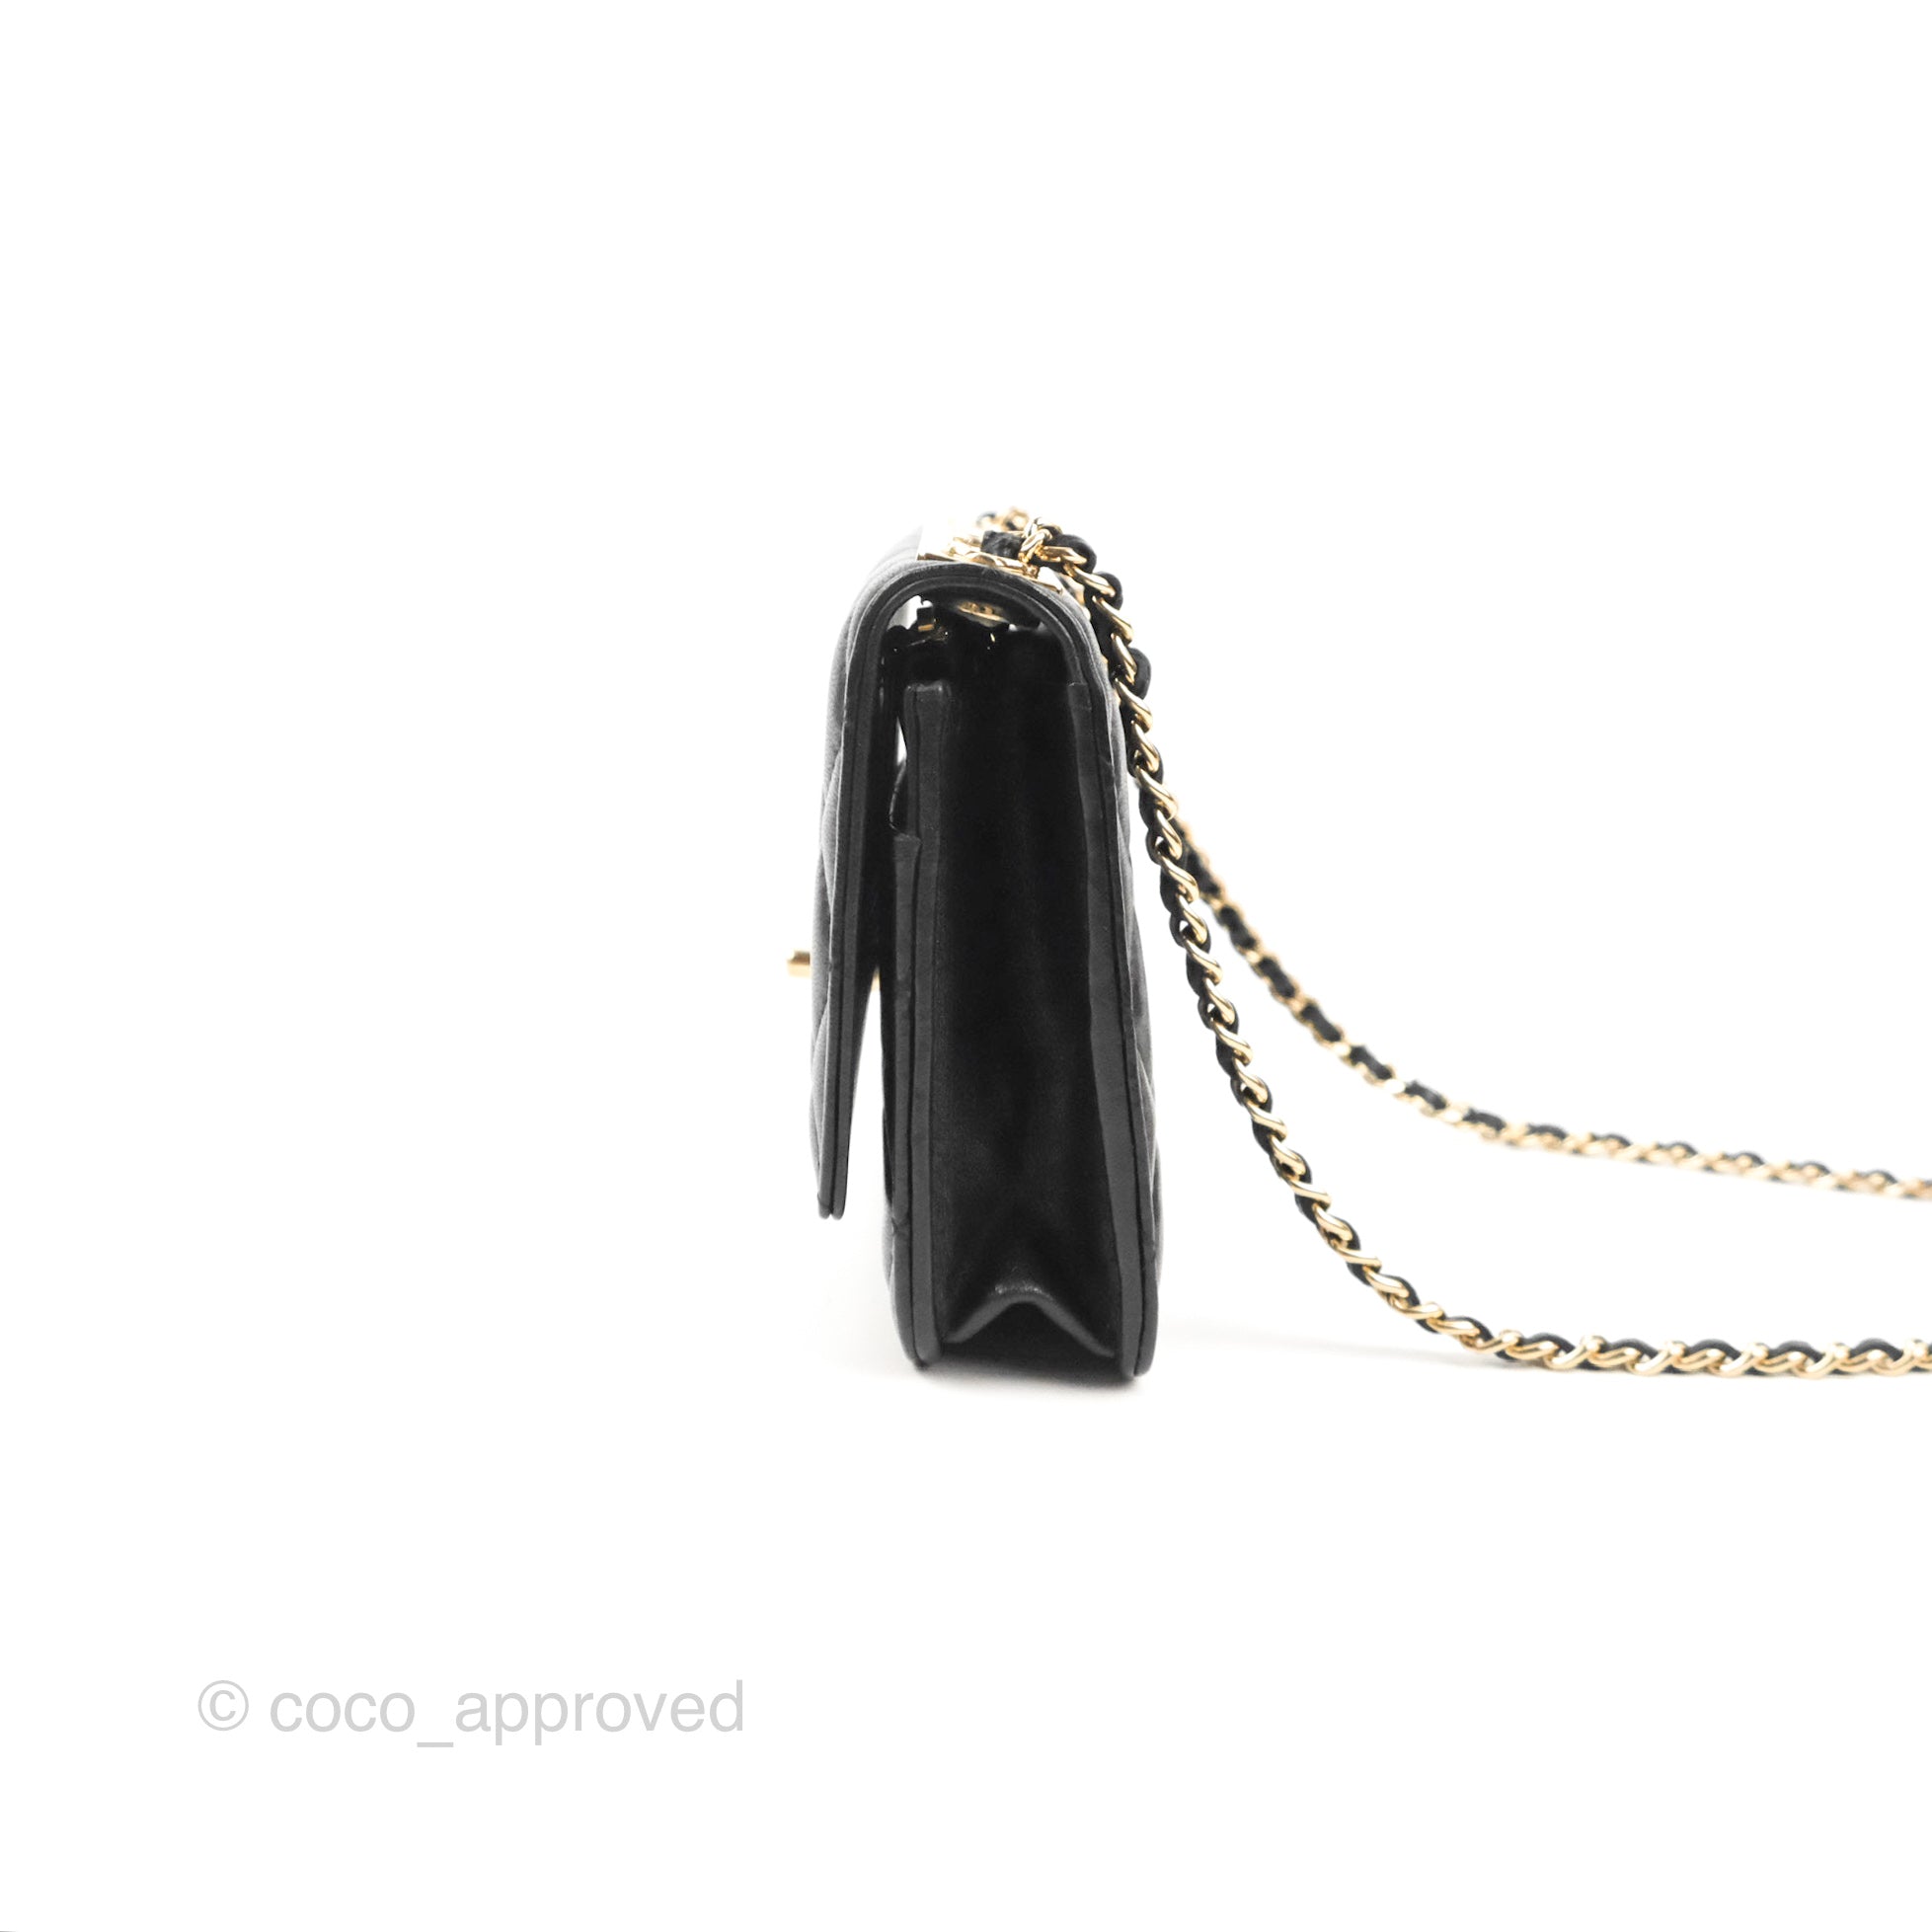 Vintage Chanel Wallet on Chain in Black Patented Leather